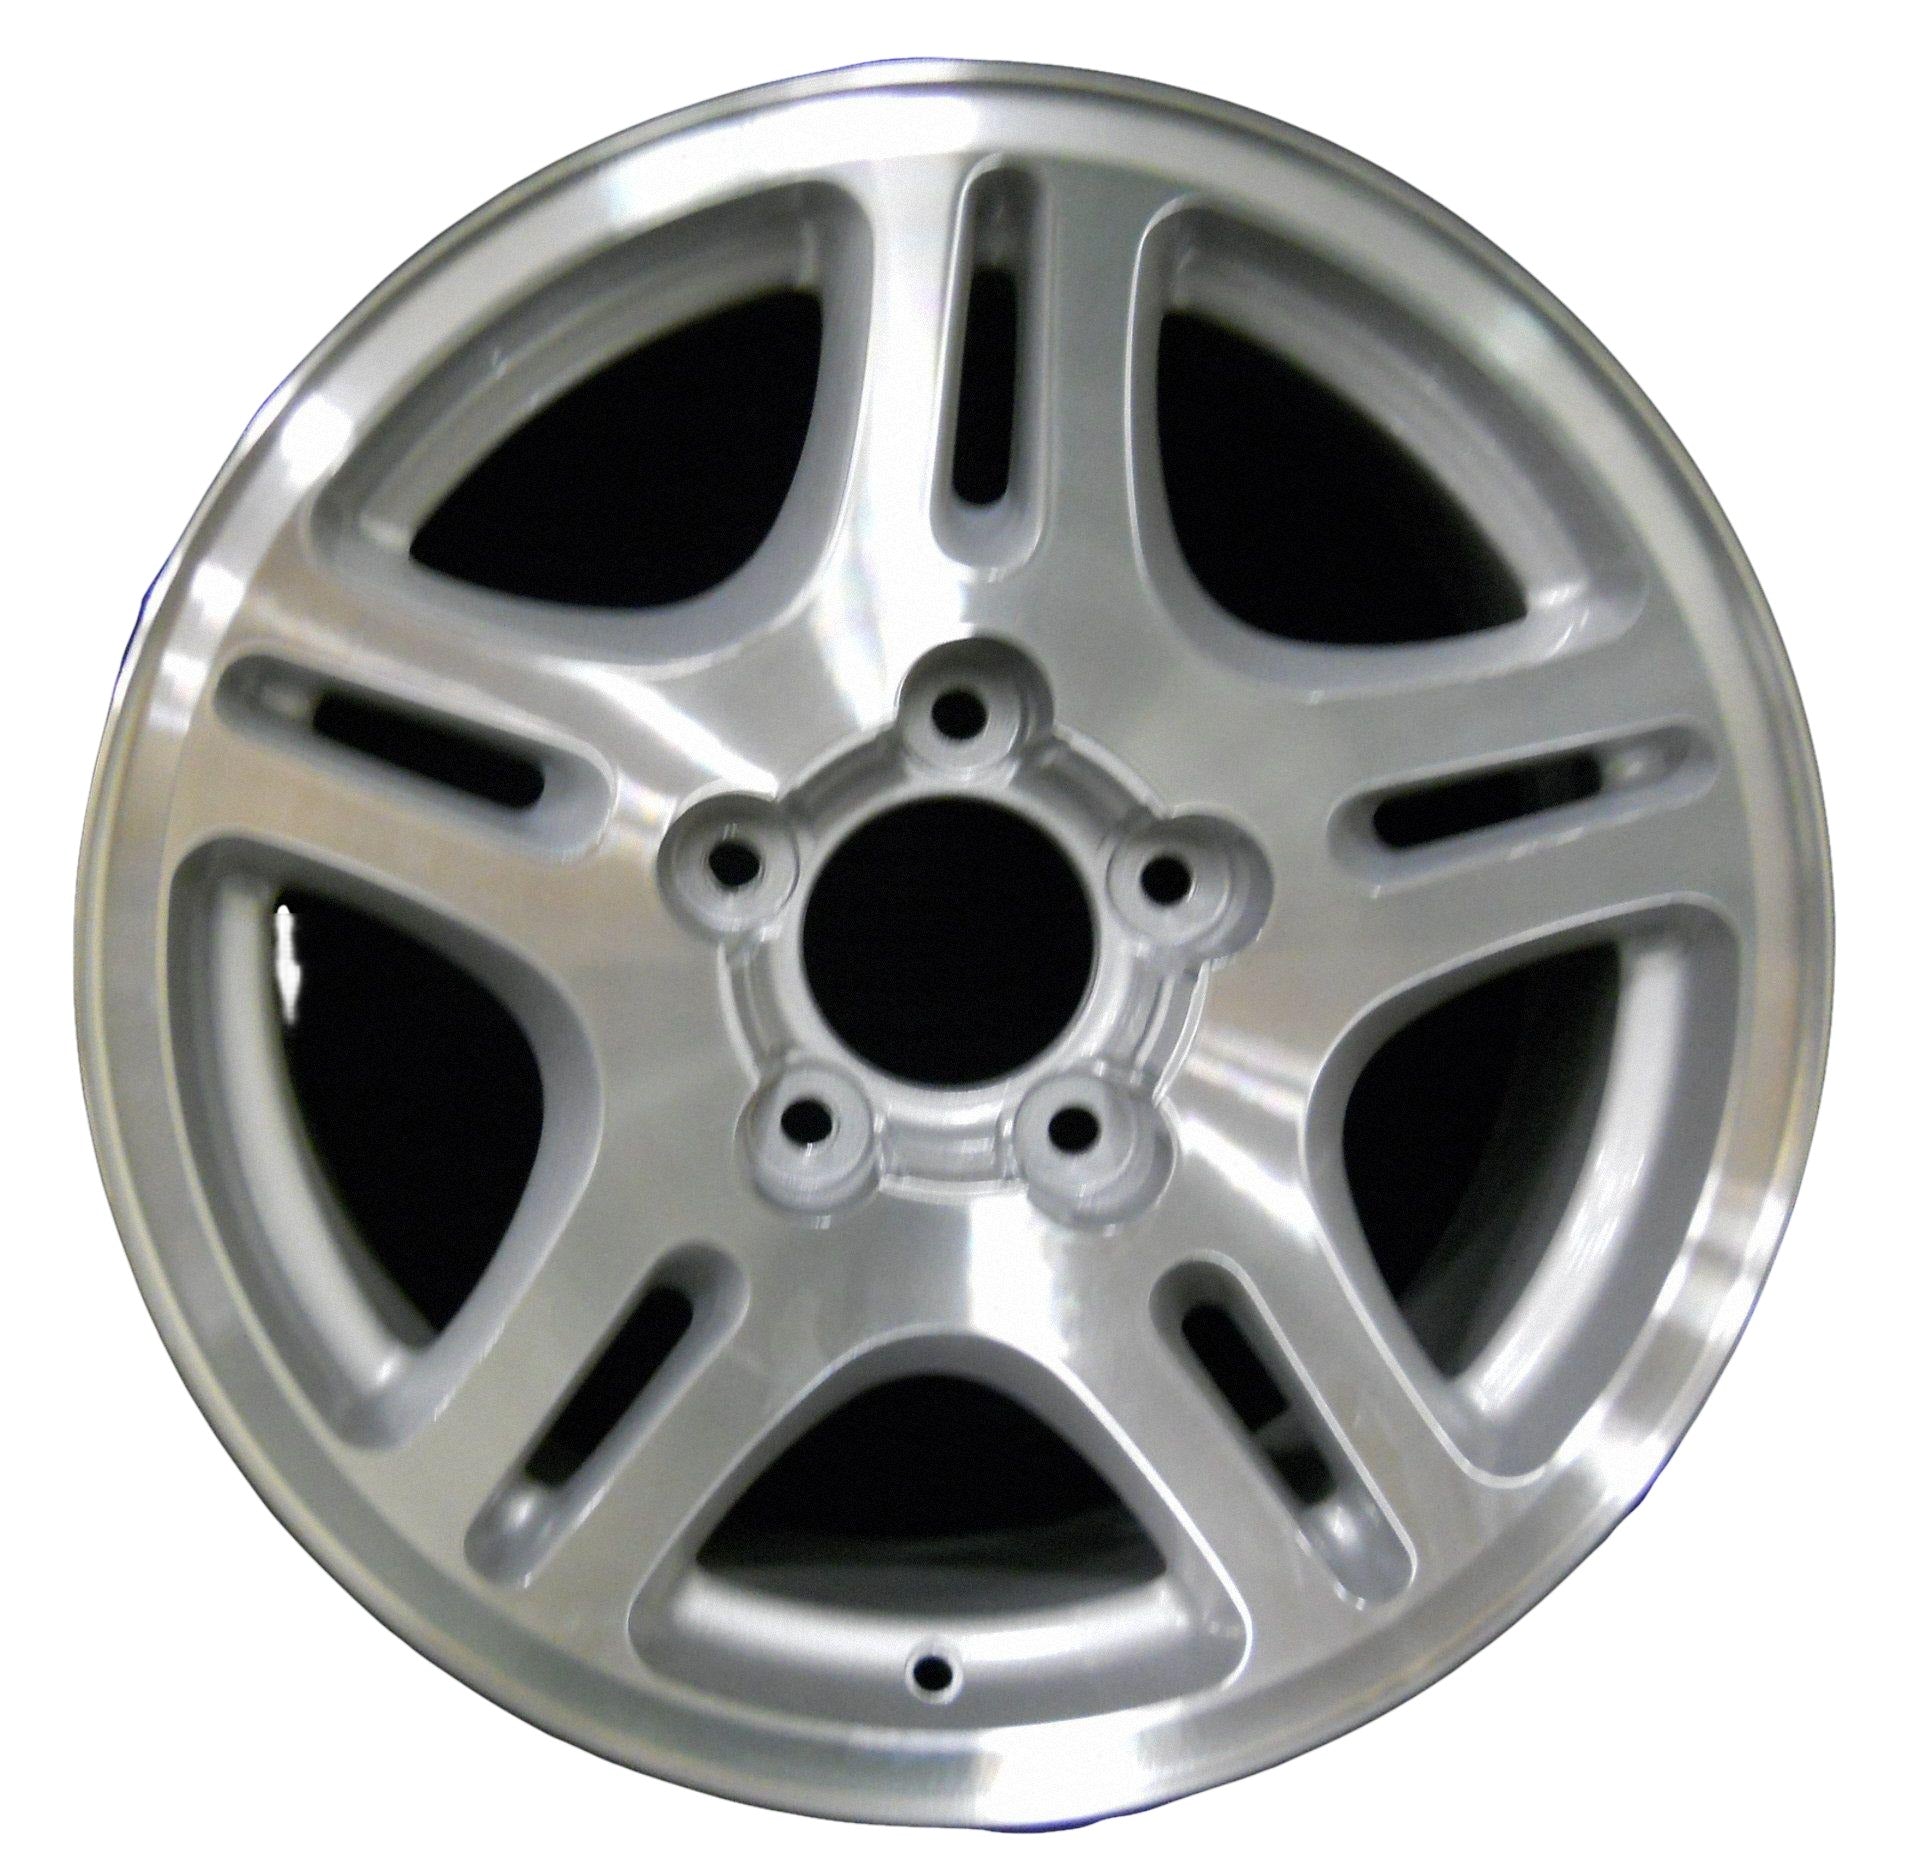 Ford F150 Truck  2000, 2001, 2002, 2003, 2004 Factory OEM Car Wheel Size 17x7.5 Alloy WAO.3467.PS02.MA